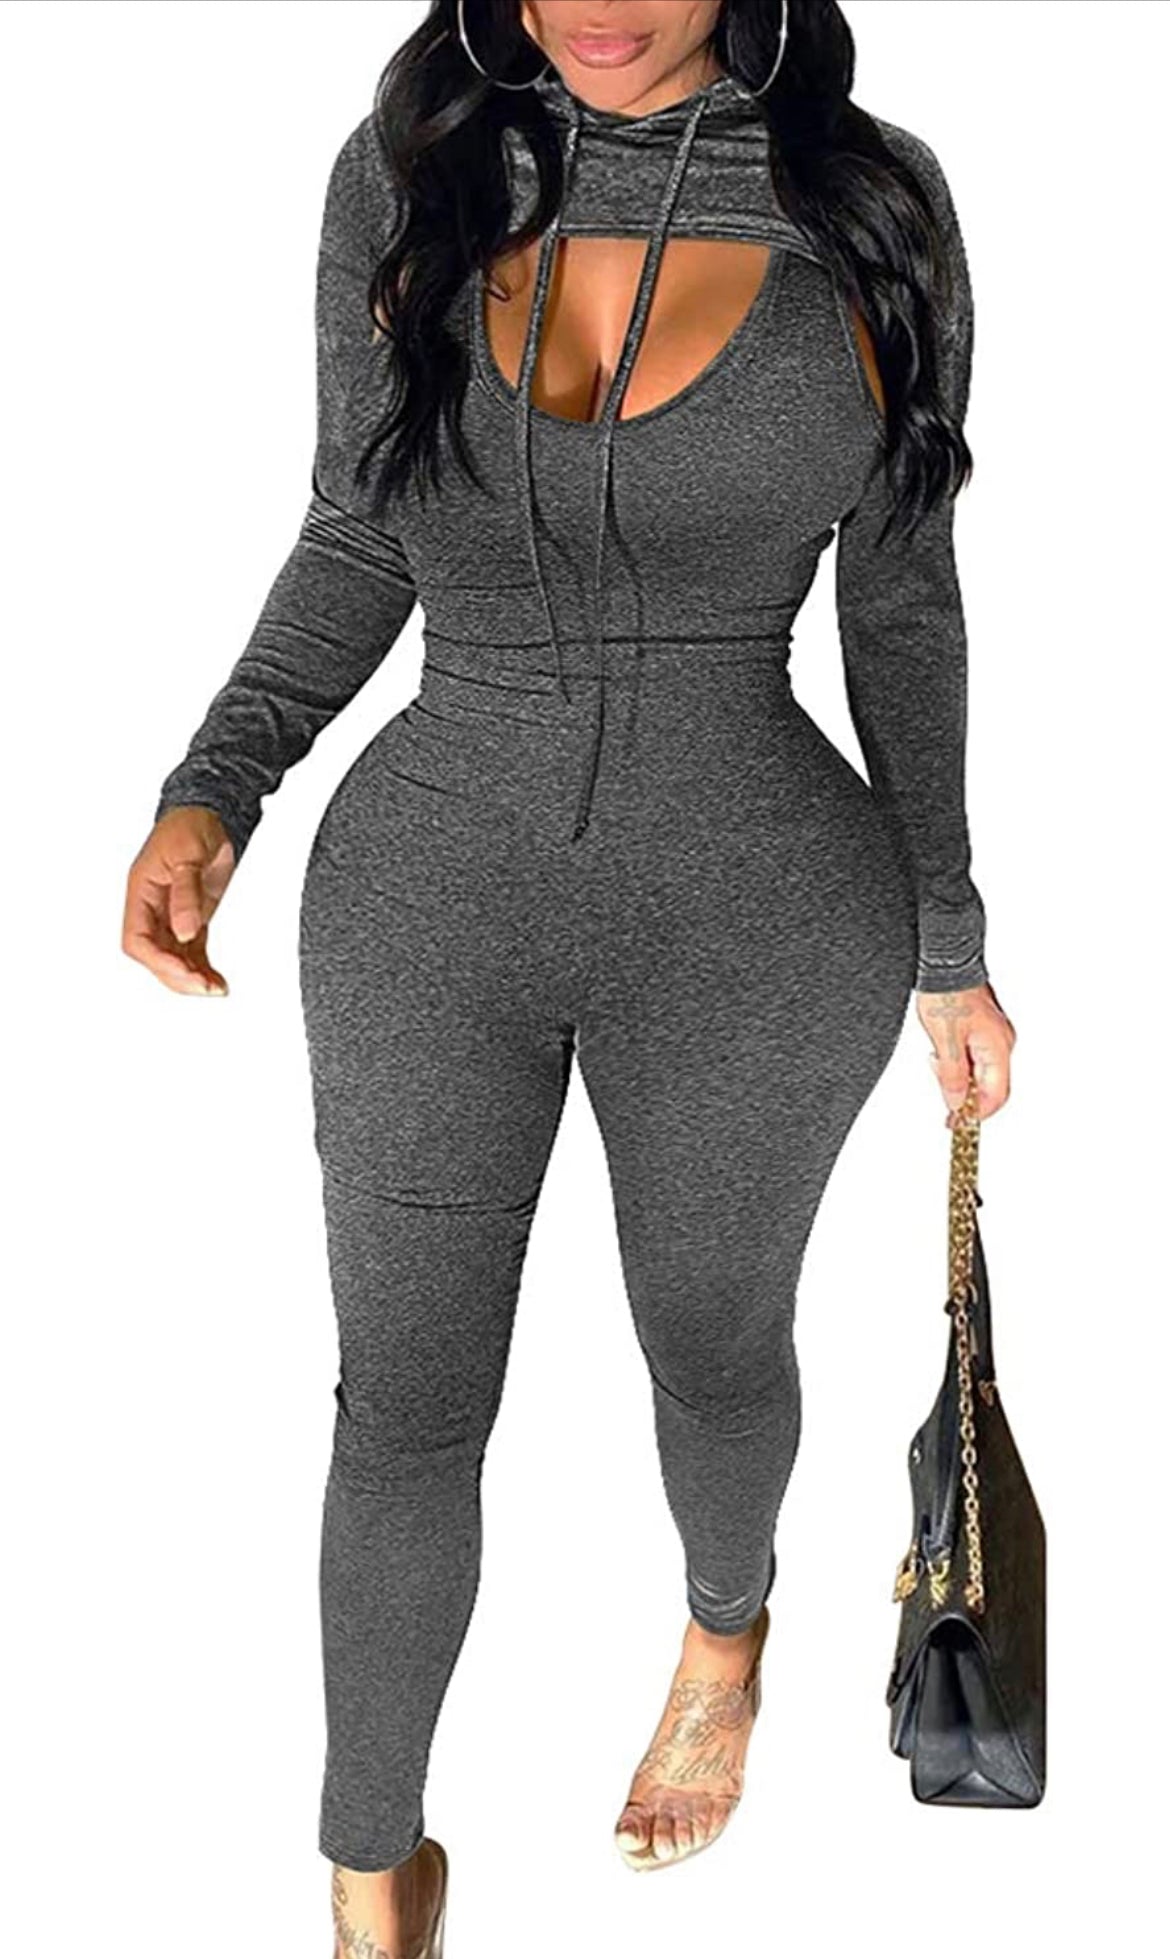 Sexy Two Piece Jumpsuit Hooded Crop Top - BossBabe401